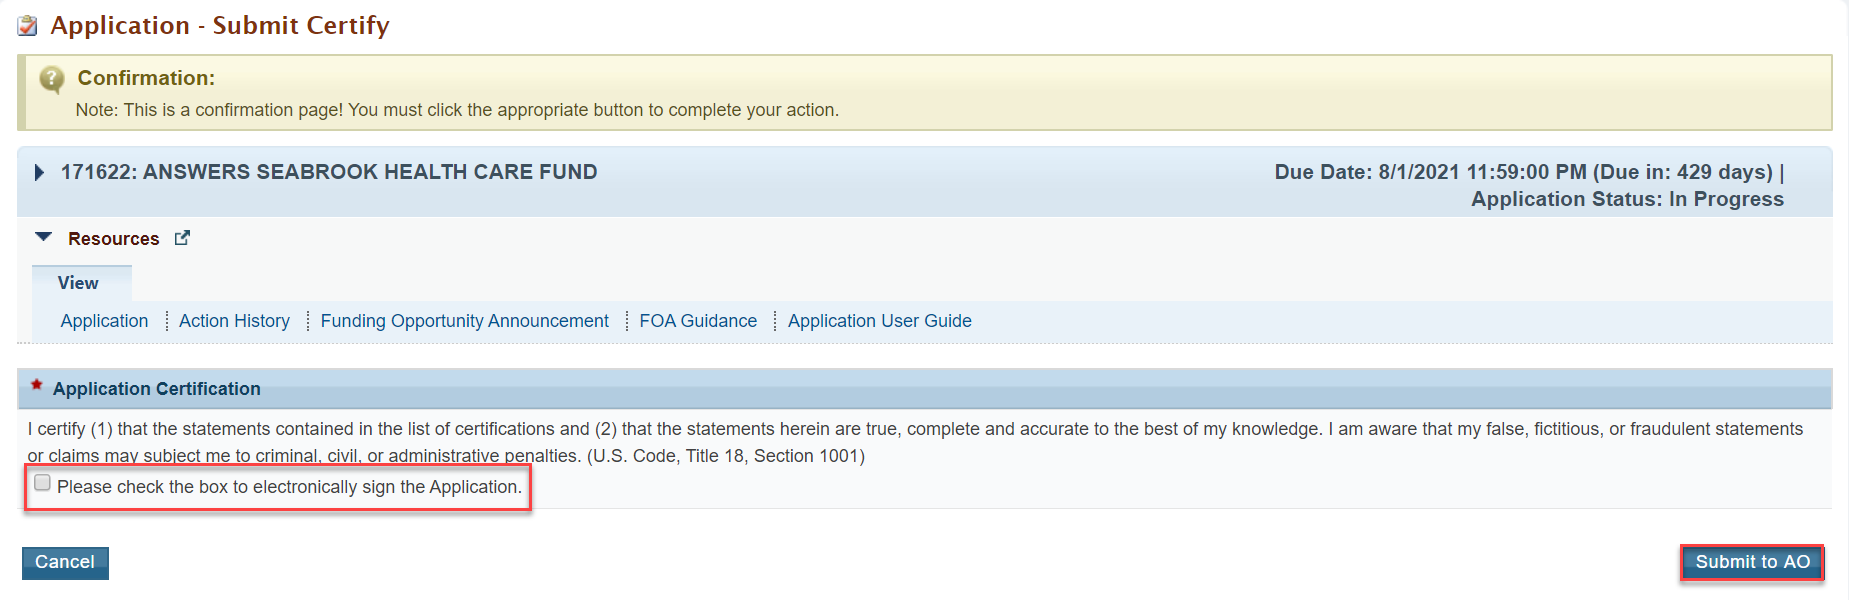 Screenshot of Application - Submit Certify page for Application Owner